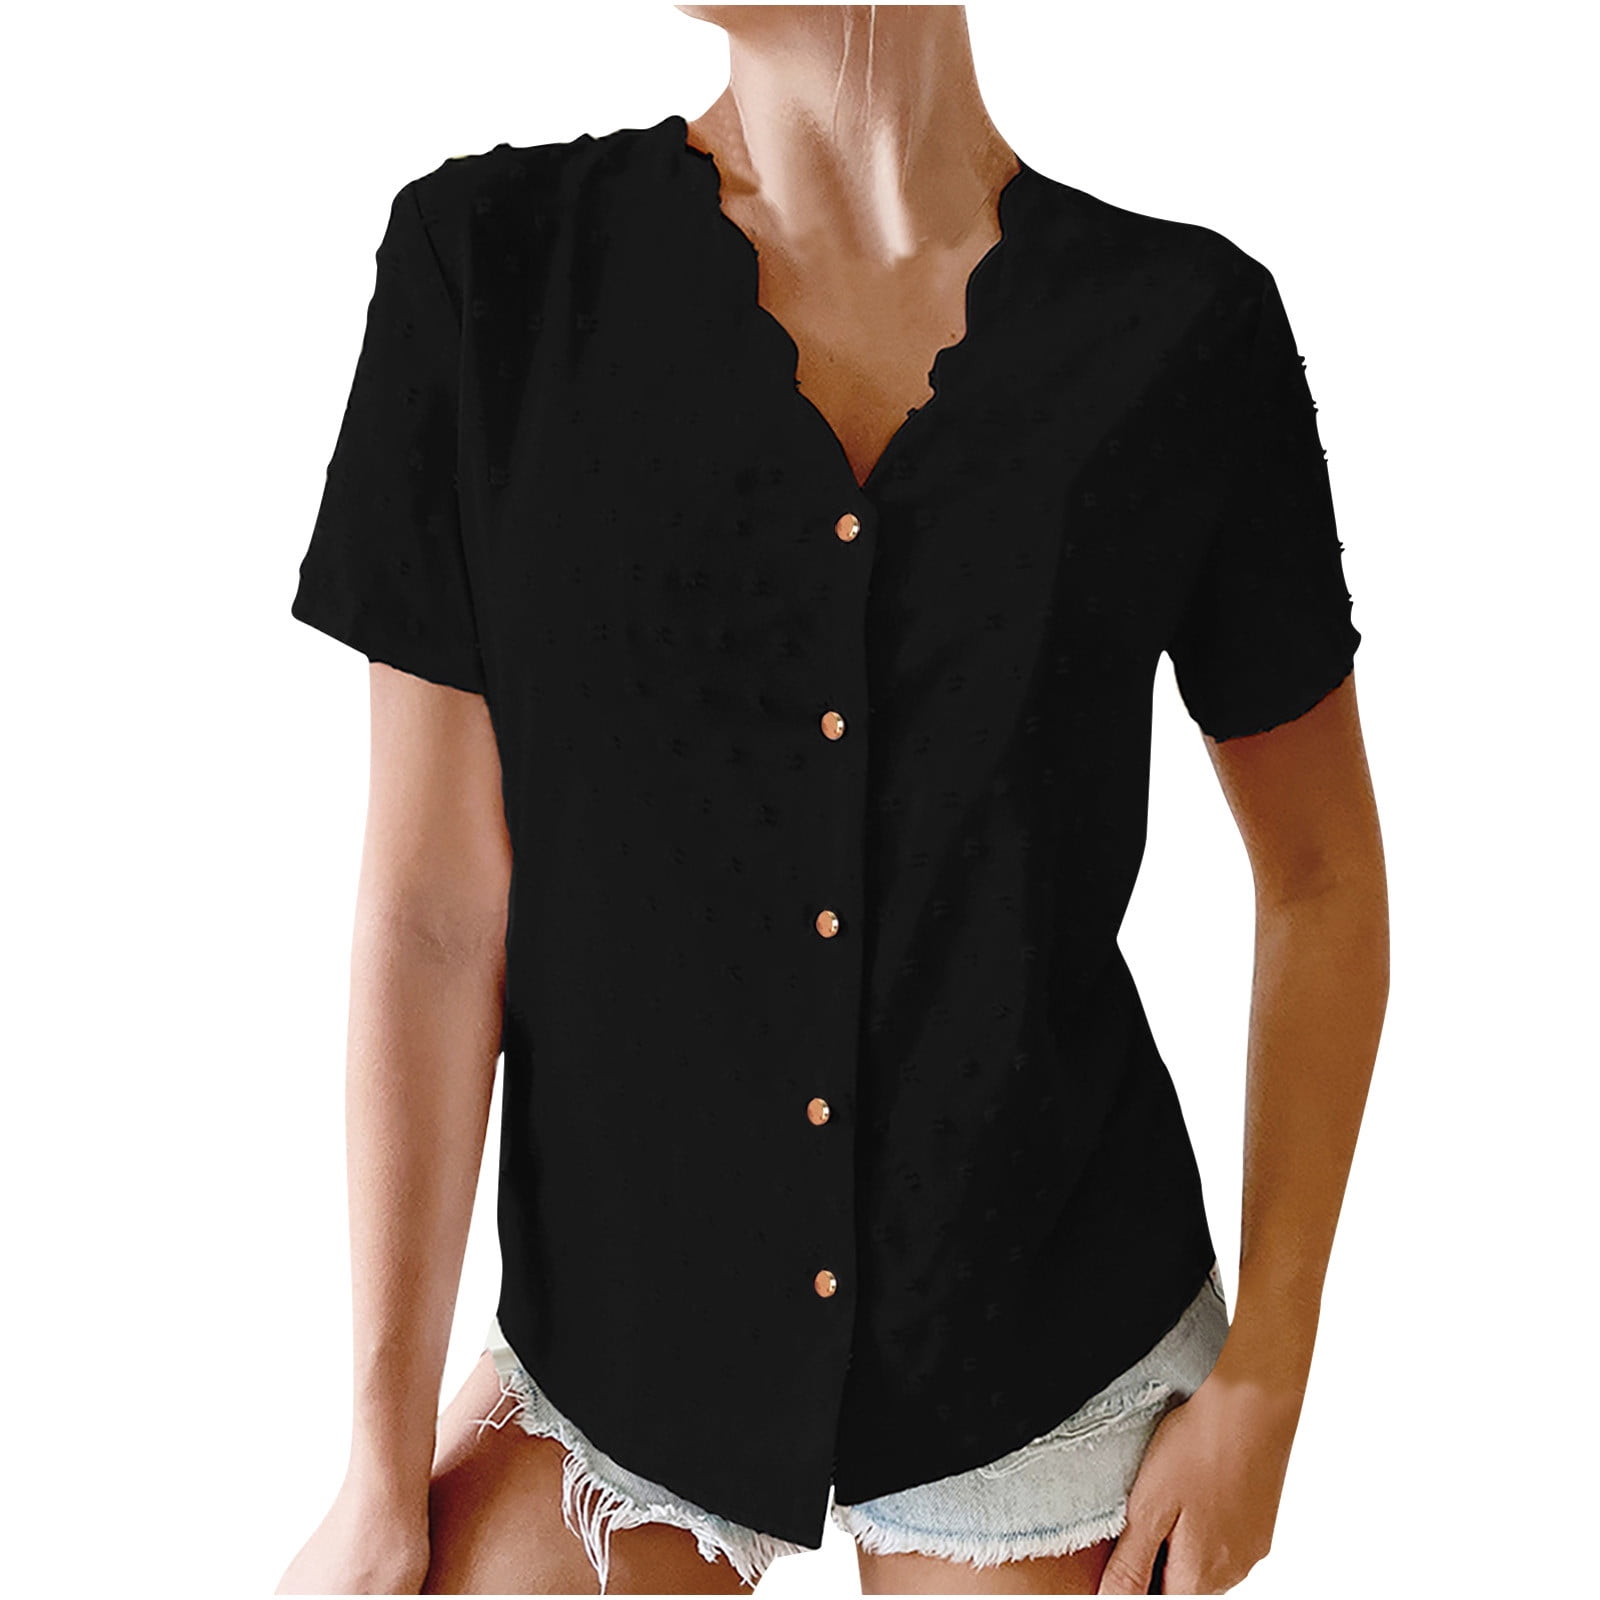 Womens Blouses And Tops Dressy Short Sleeve Women's Fashion